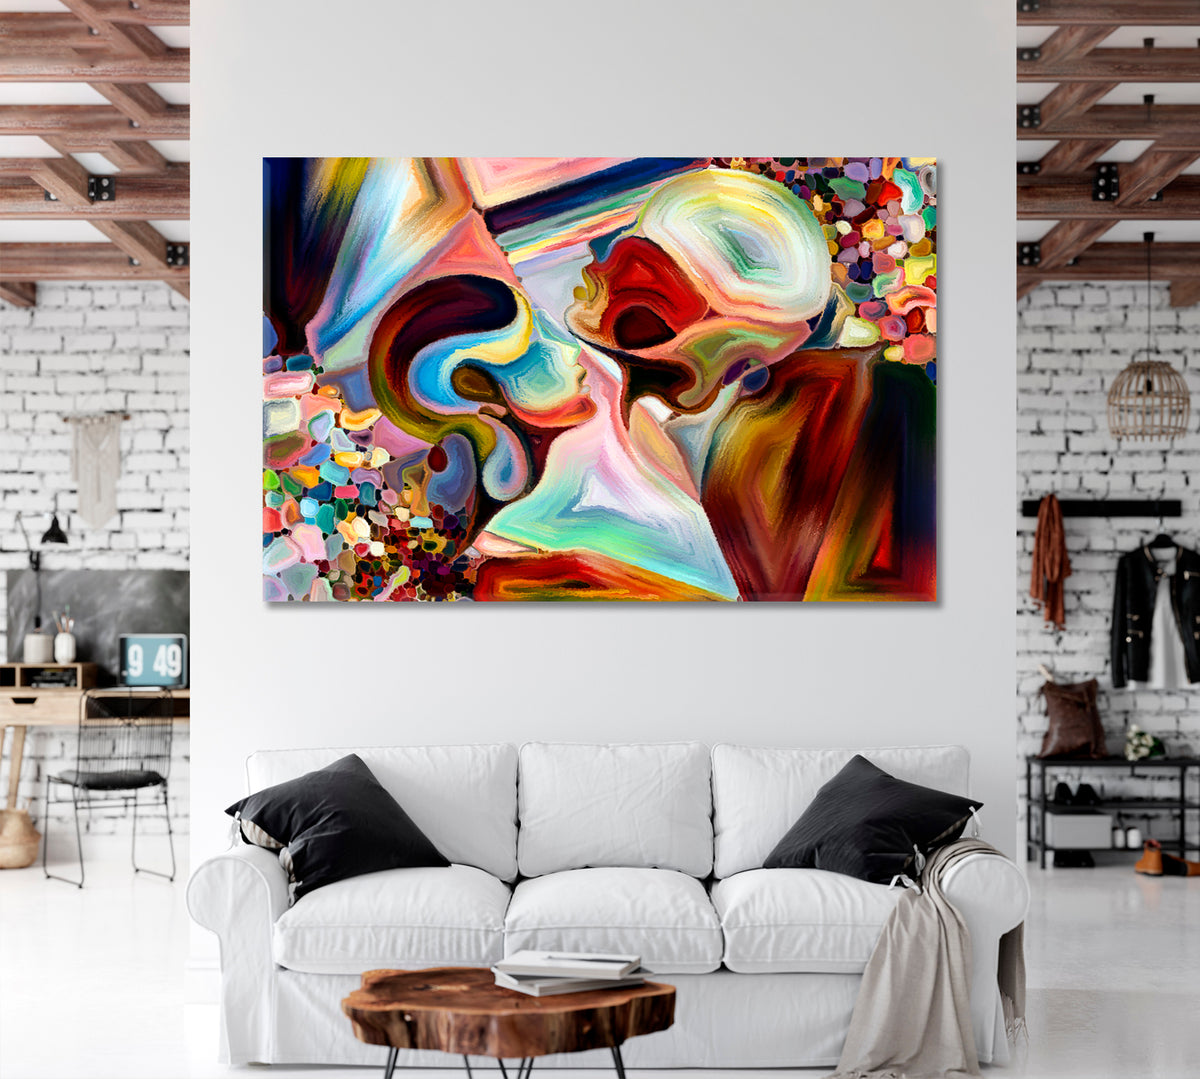 ABSTRACT Shapes Mosaic Pattern Beautiful Colorful Art Abstract Art Print Artesty 1 panel 24" x 16" 